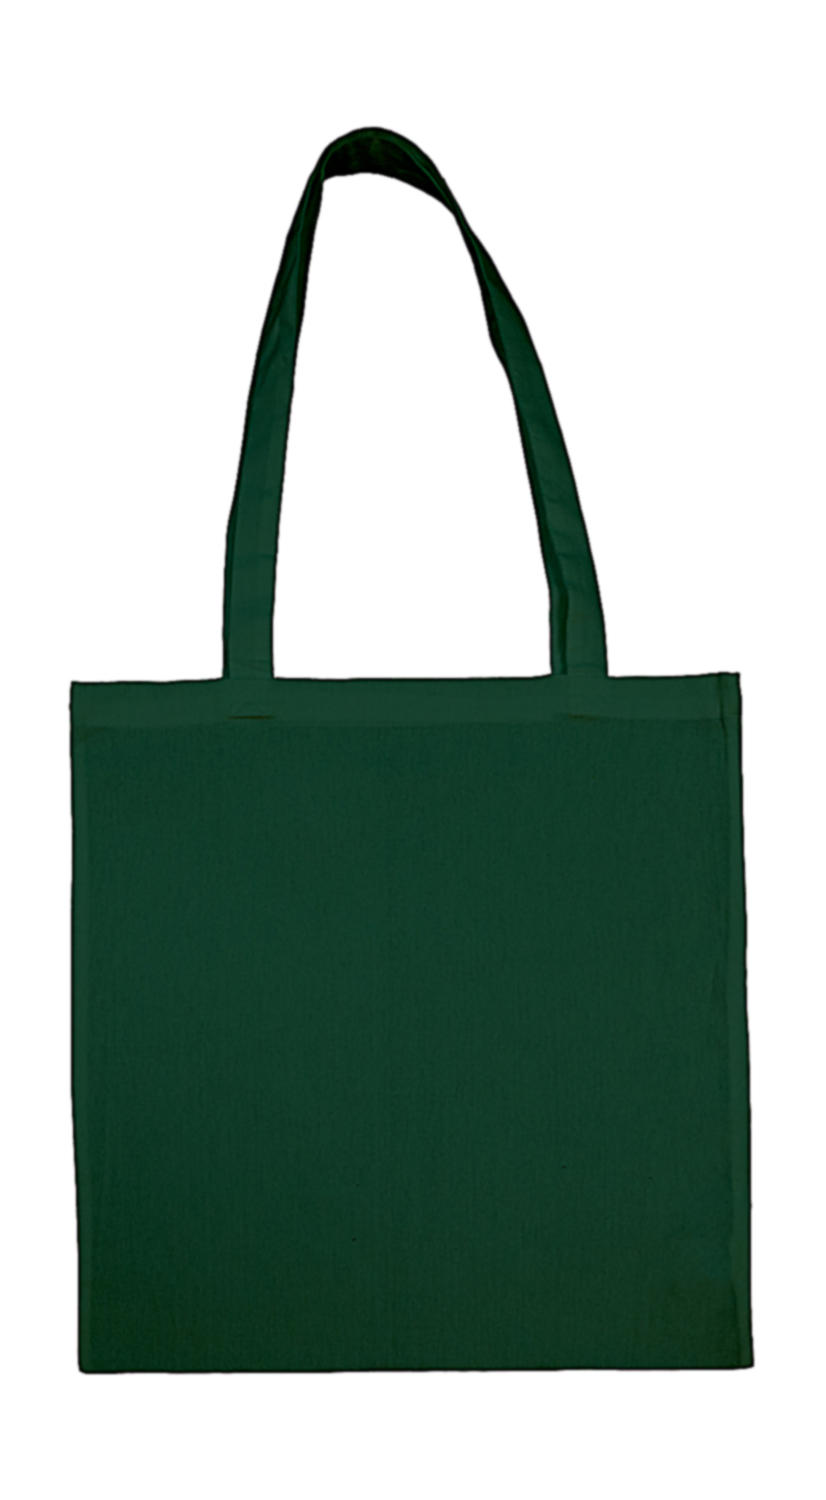  Cotton Bag LH in Farbe Bottle Green